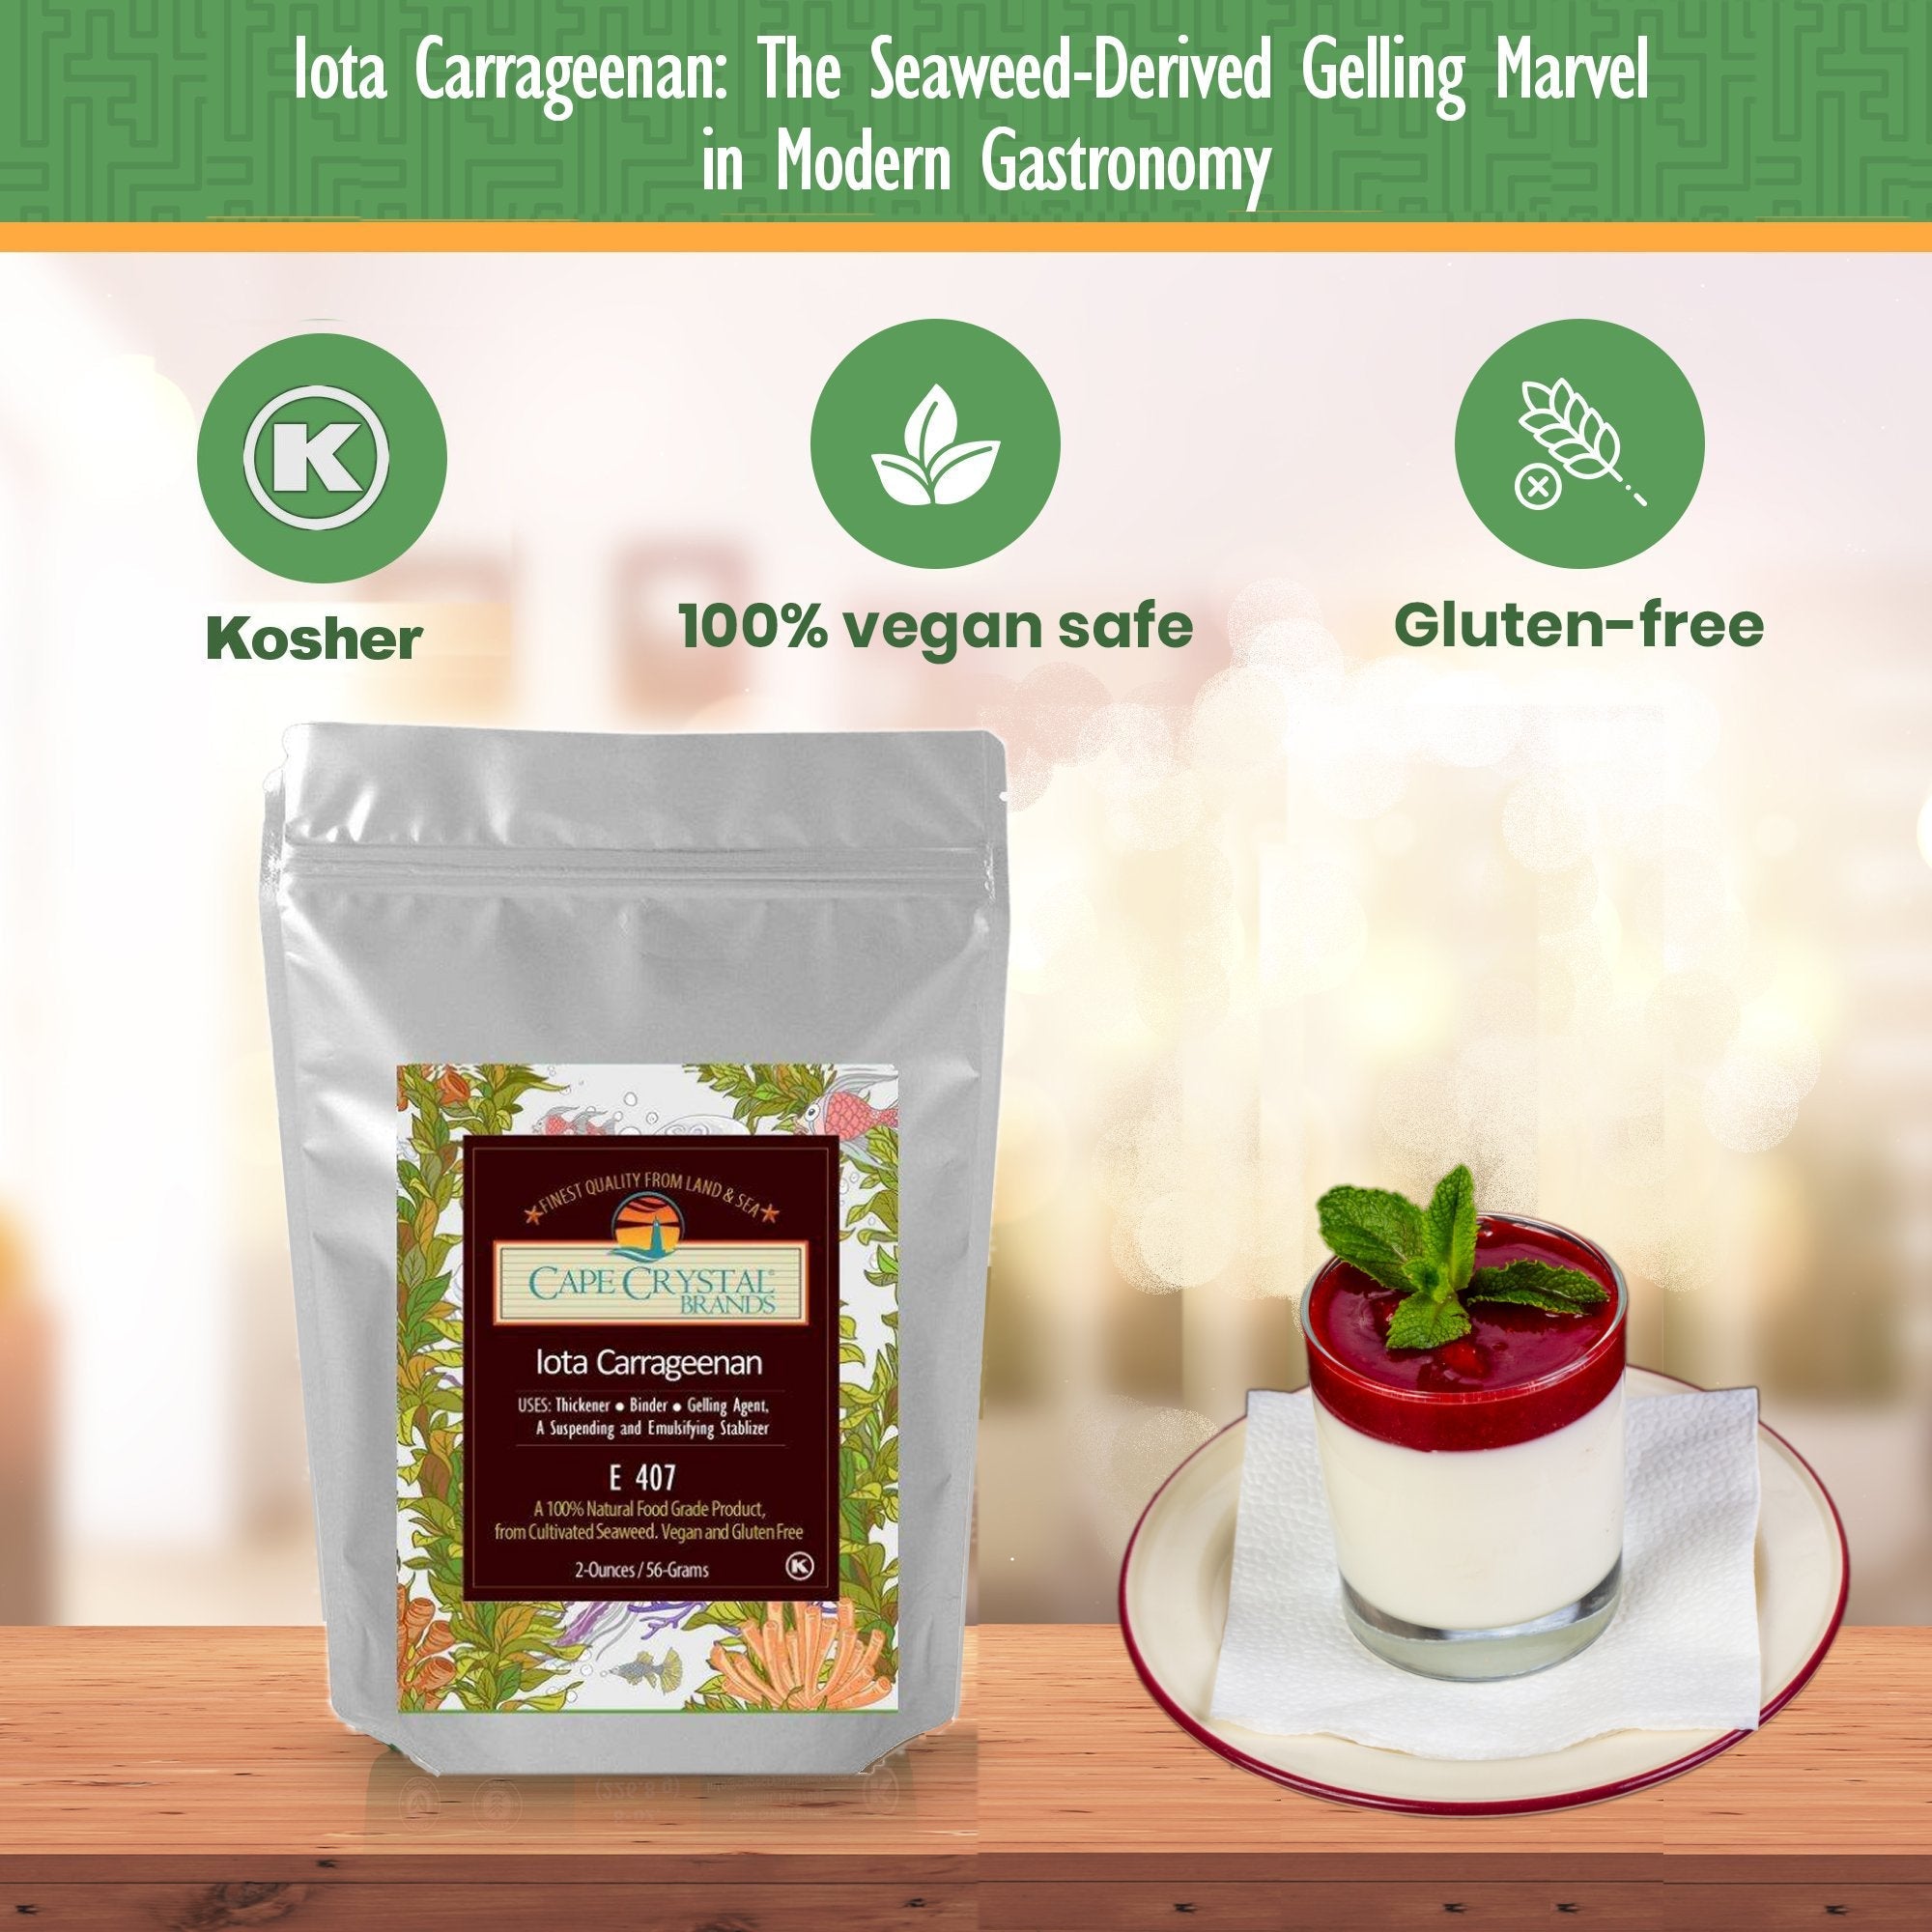 How to Use Iota Carrageenan in the Kitchen